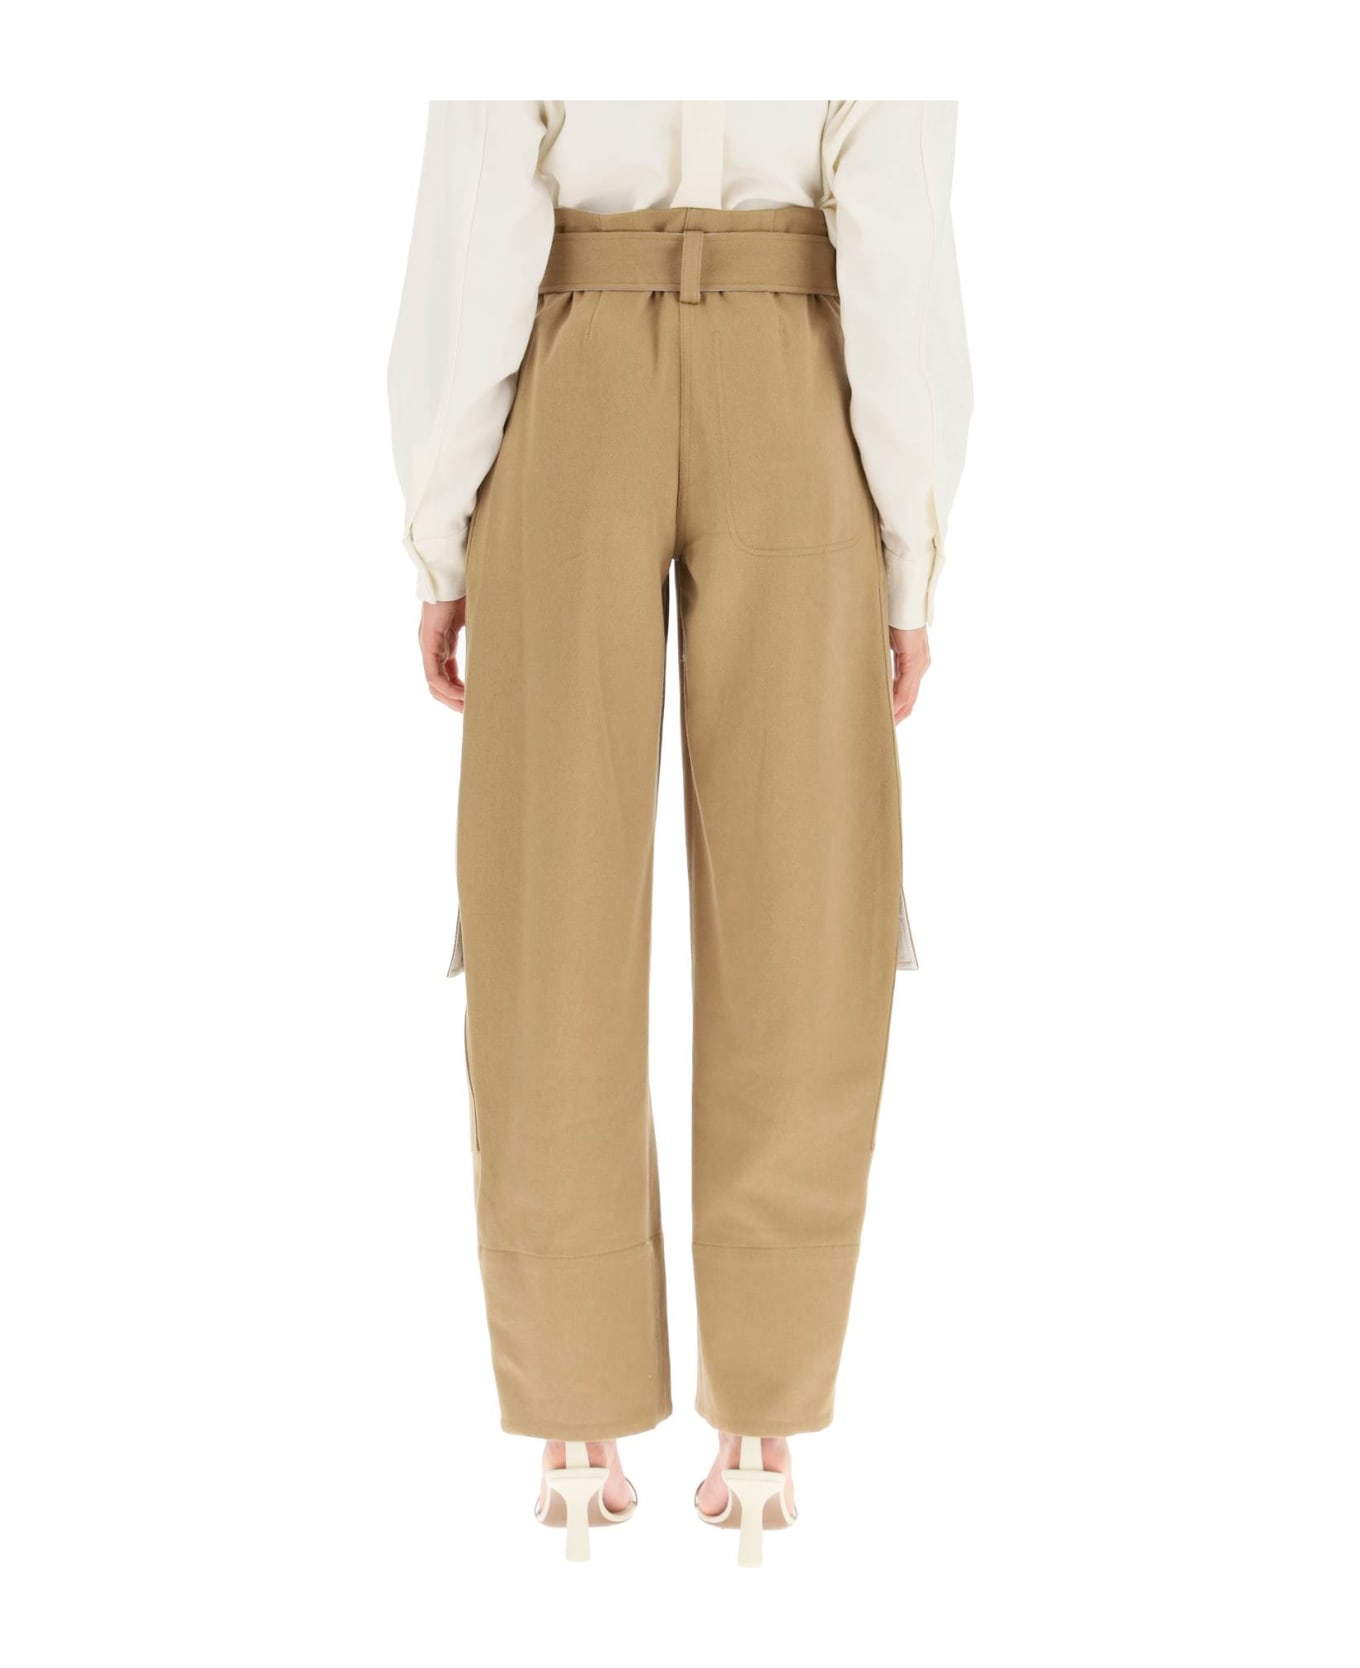 Low Classic Cargo Pants With Matching Belt - BEIGE (Beige) ボトムス